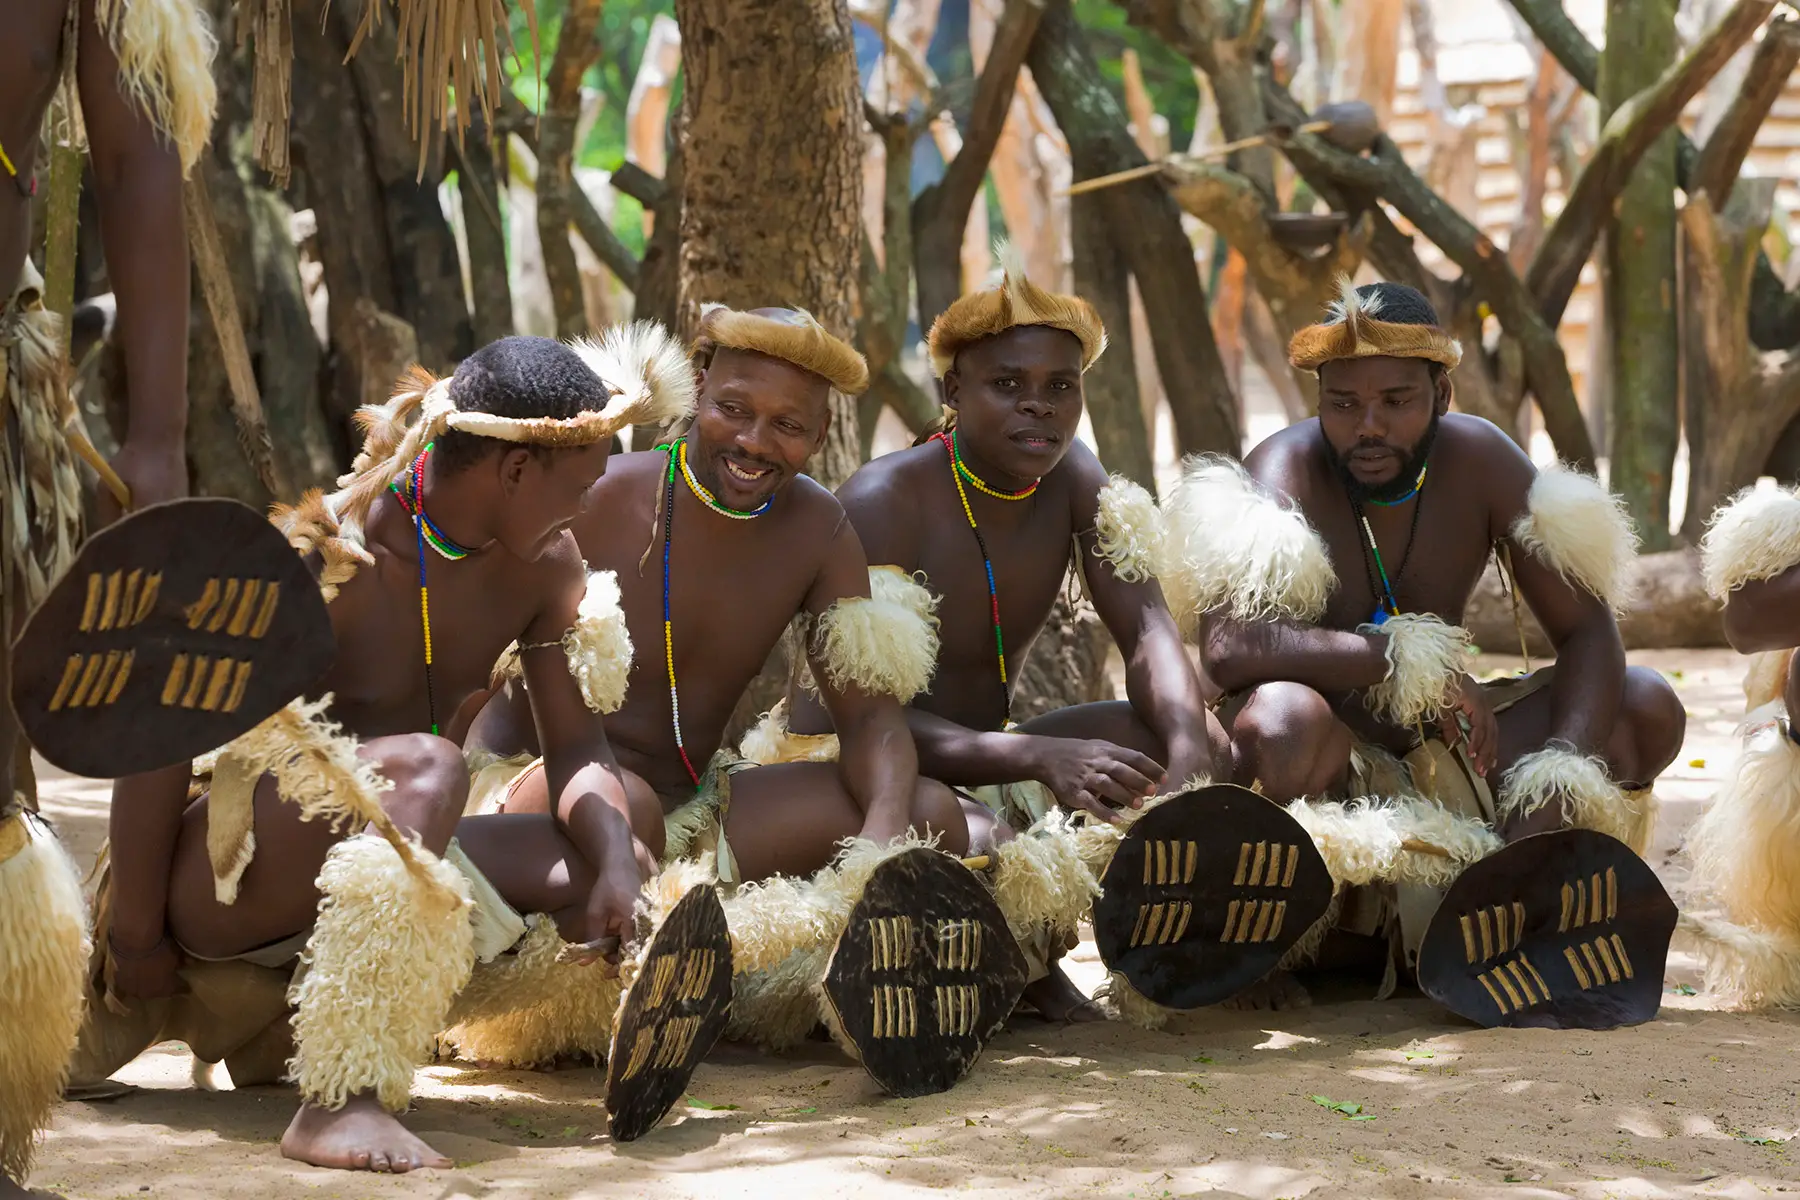 Four men, crouching in traditional Zulu warrior dress and weapons in KwaZulu Natal, South Africa